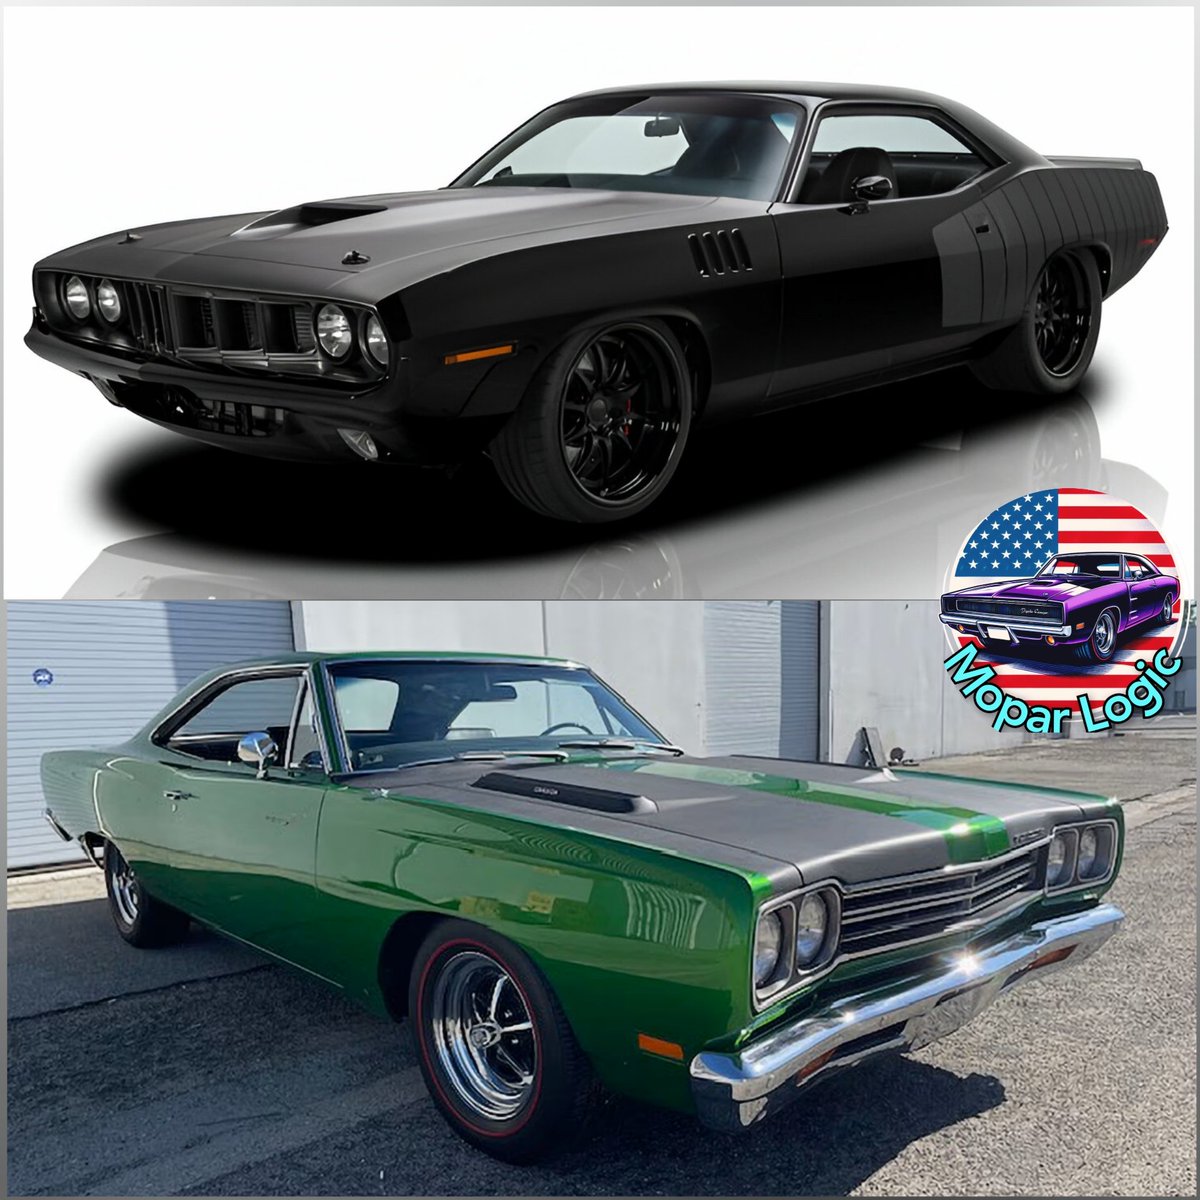 Top or bottom??